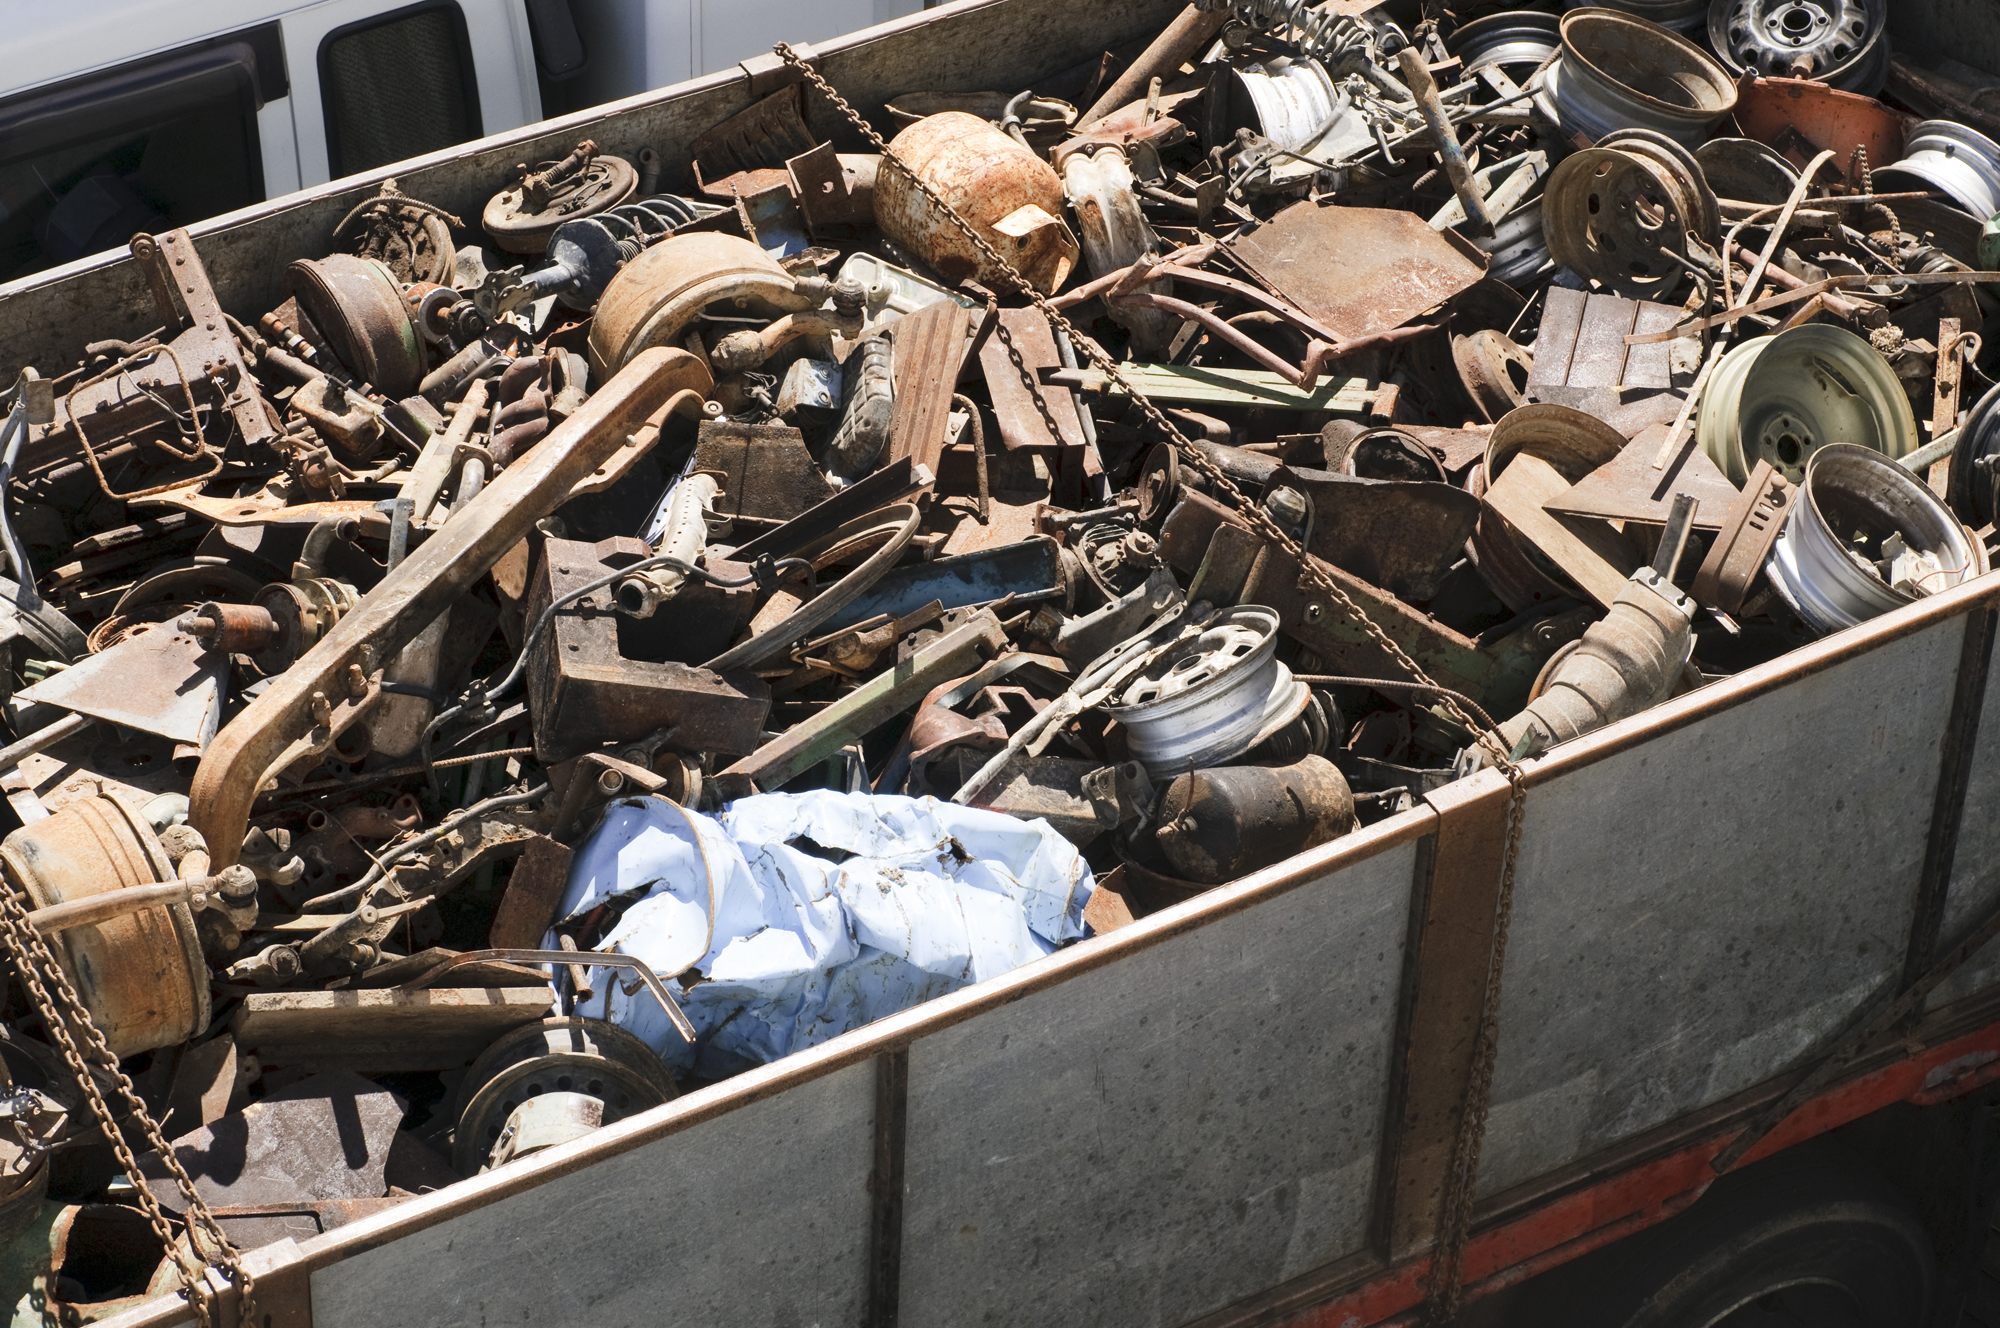 Assorted car and other scrap metal items in a large trailer.